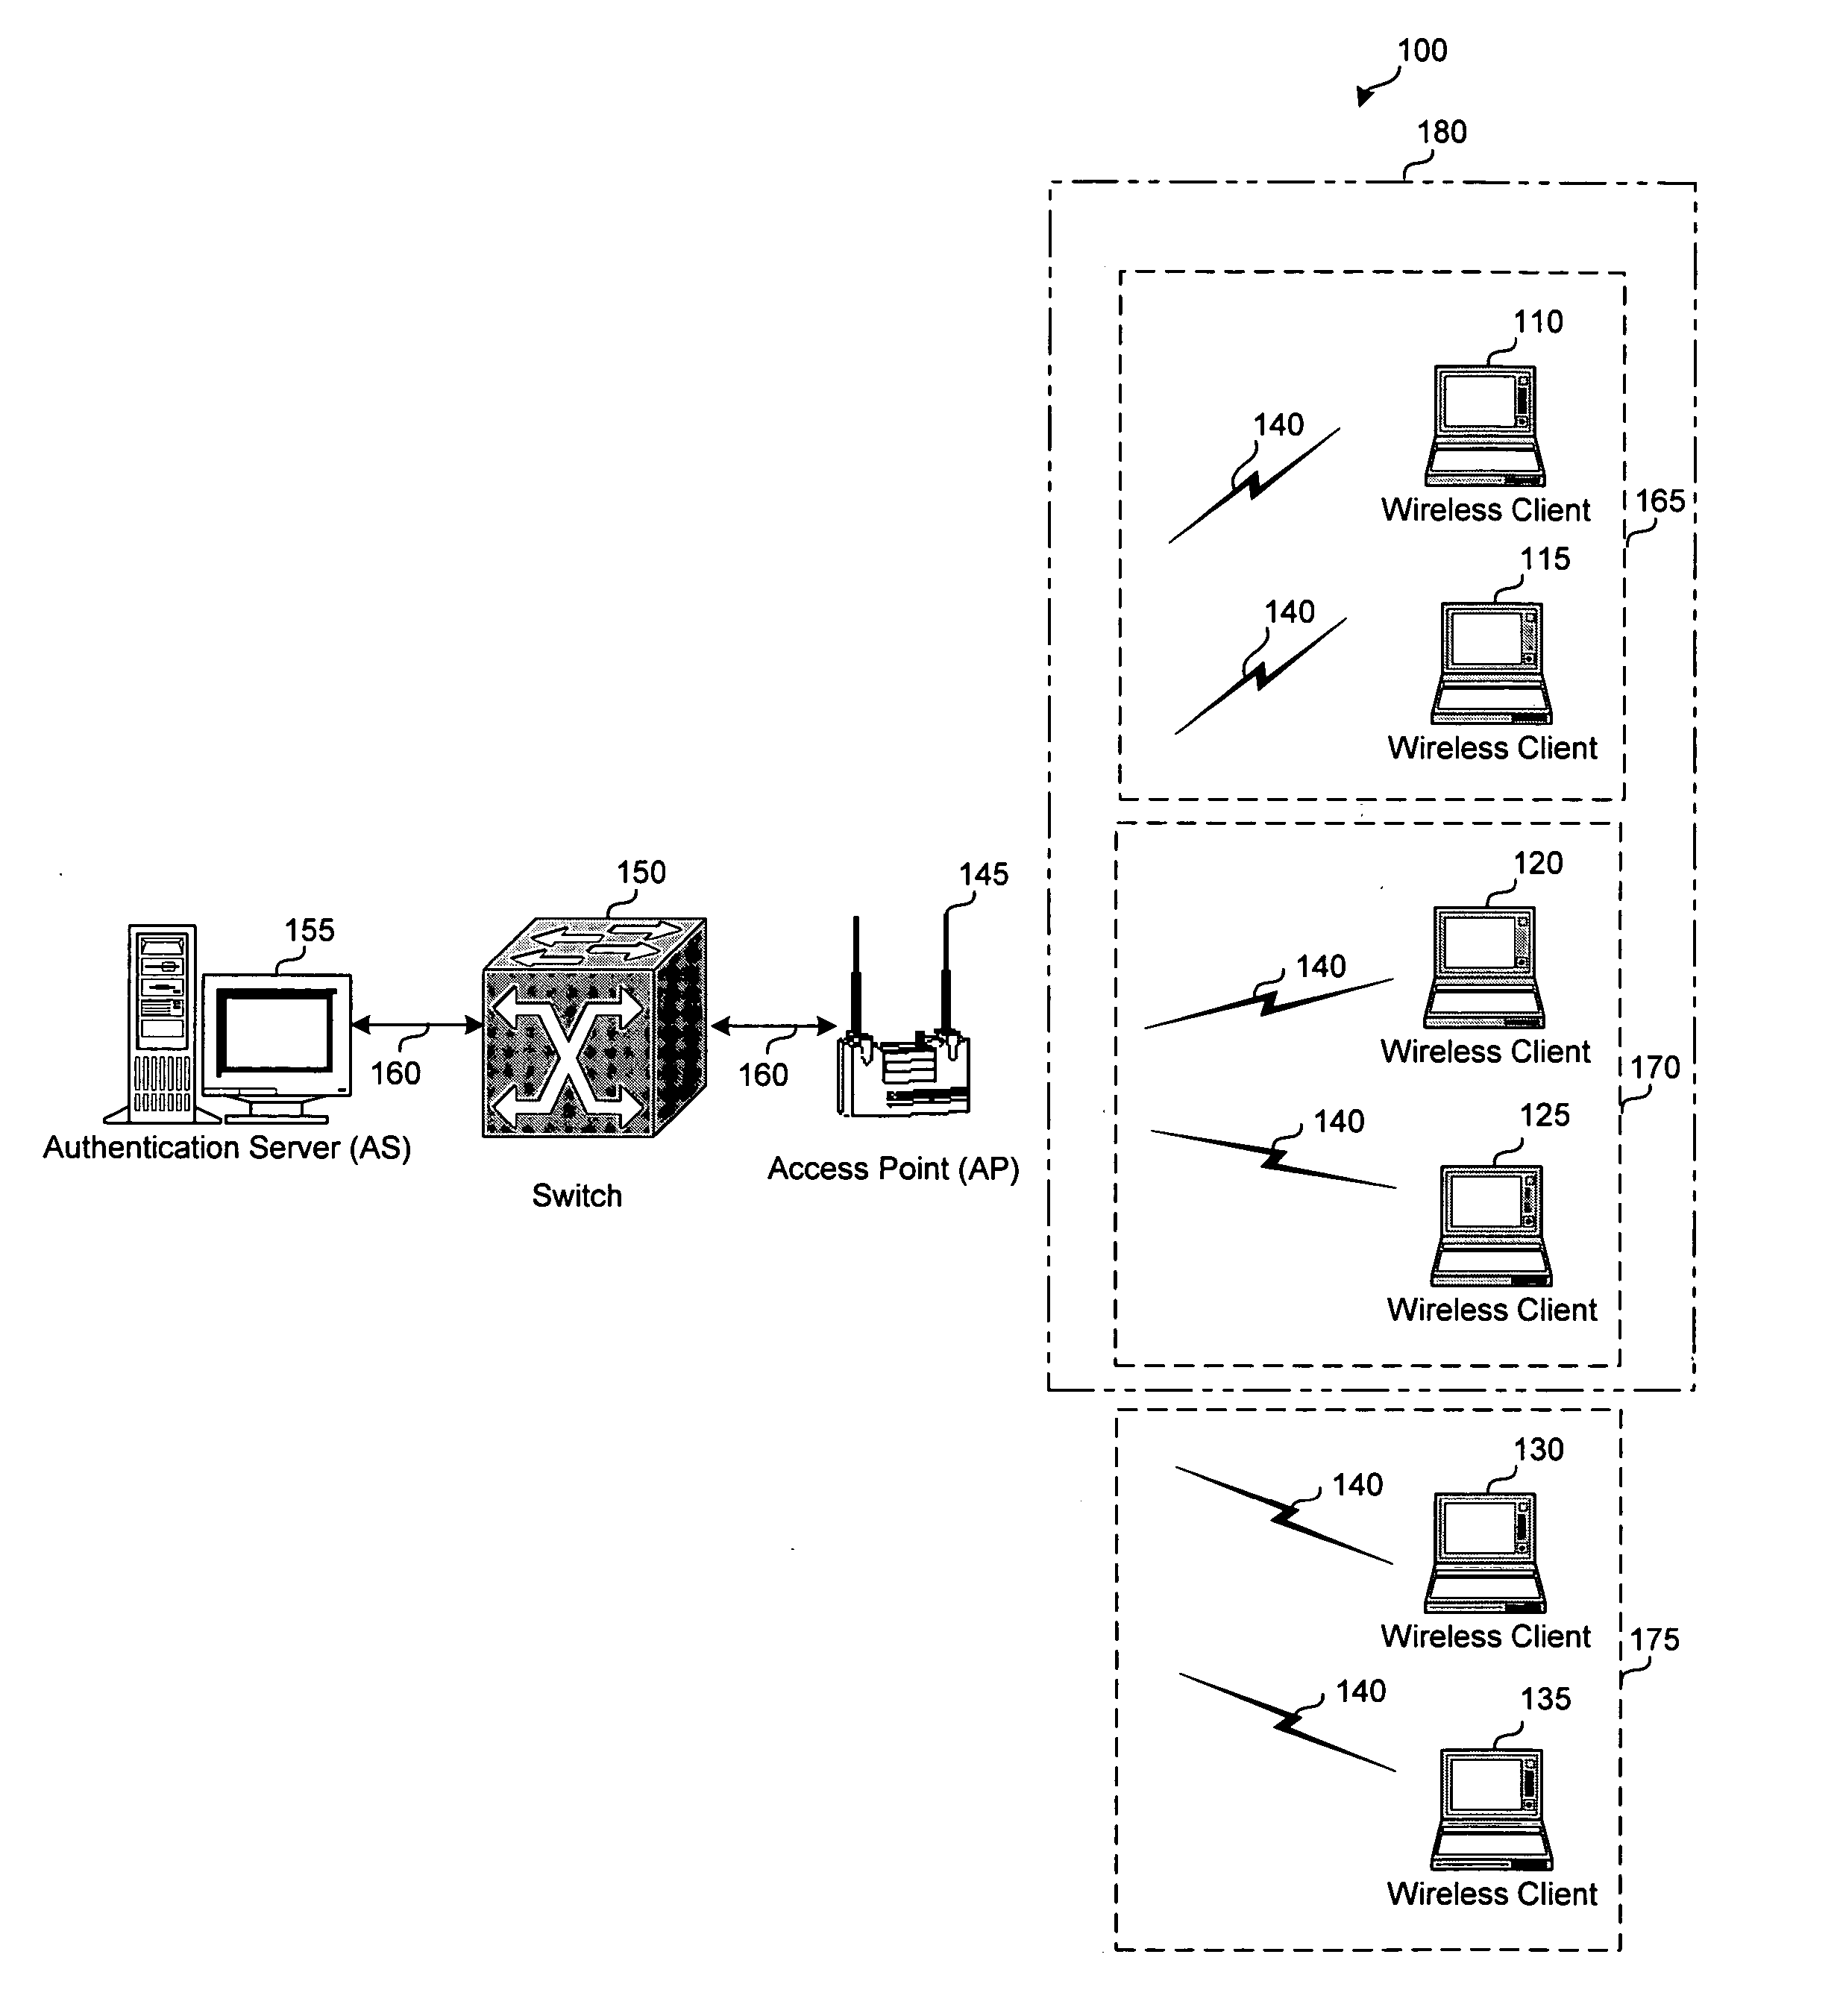 System and method for grouping multiple VLANs into a single 802.11 IP multicast domain